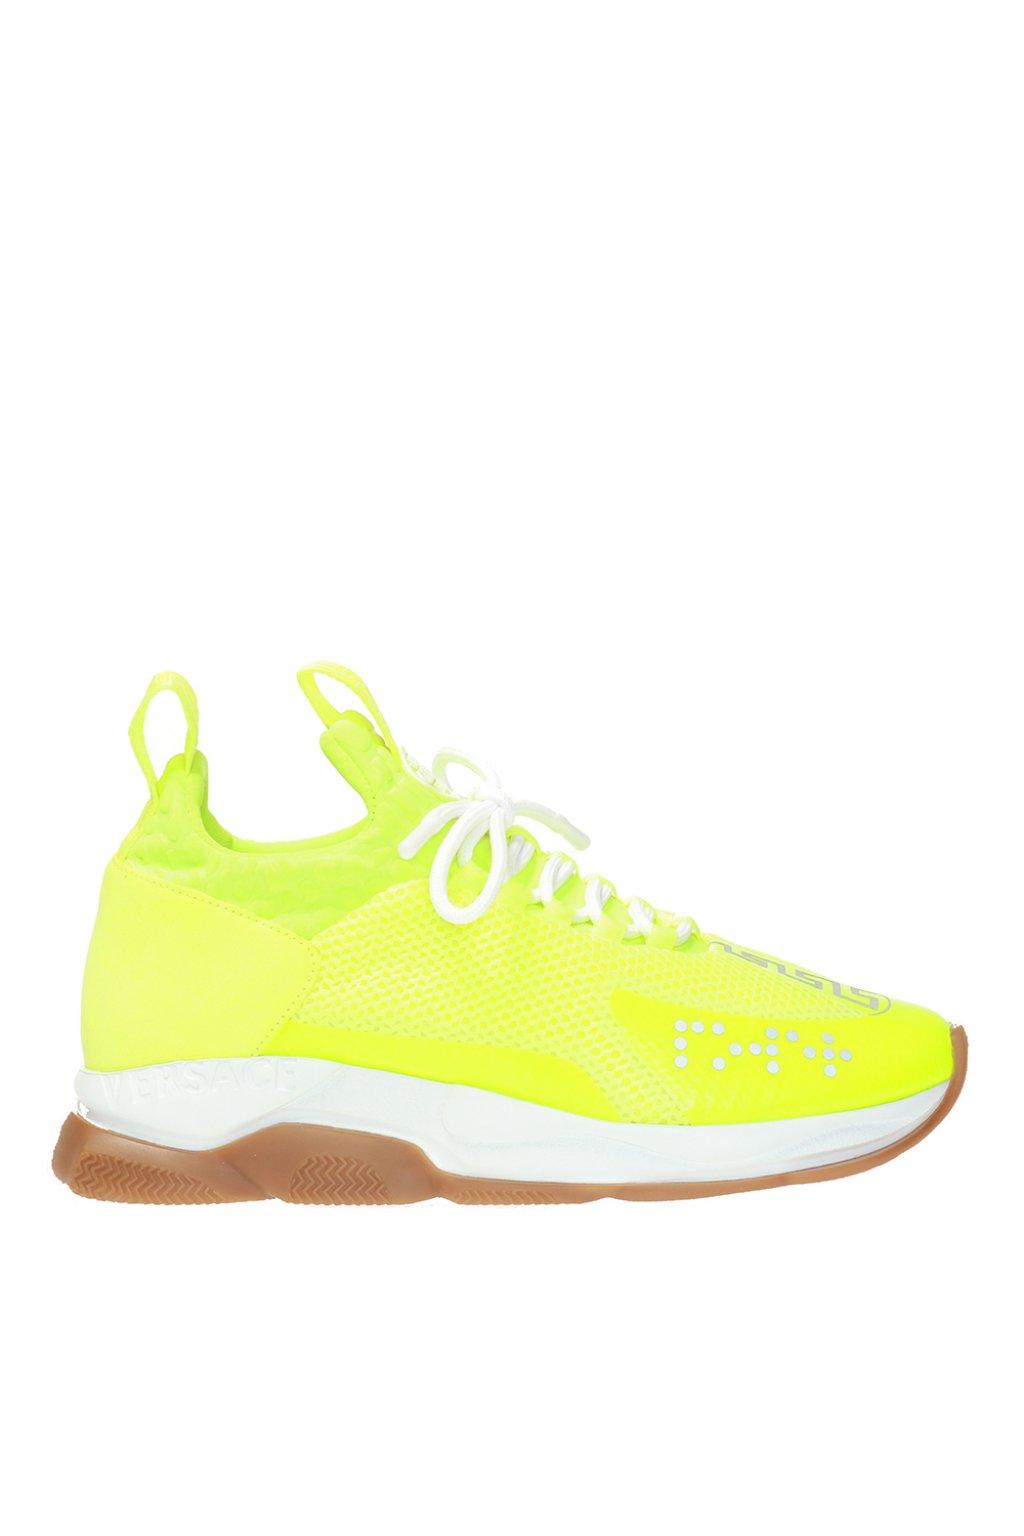 Versace Rubber 'cross Chainer' Printed Sneakers in Neon (Yellow) for ...